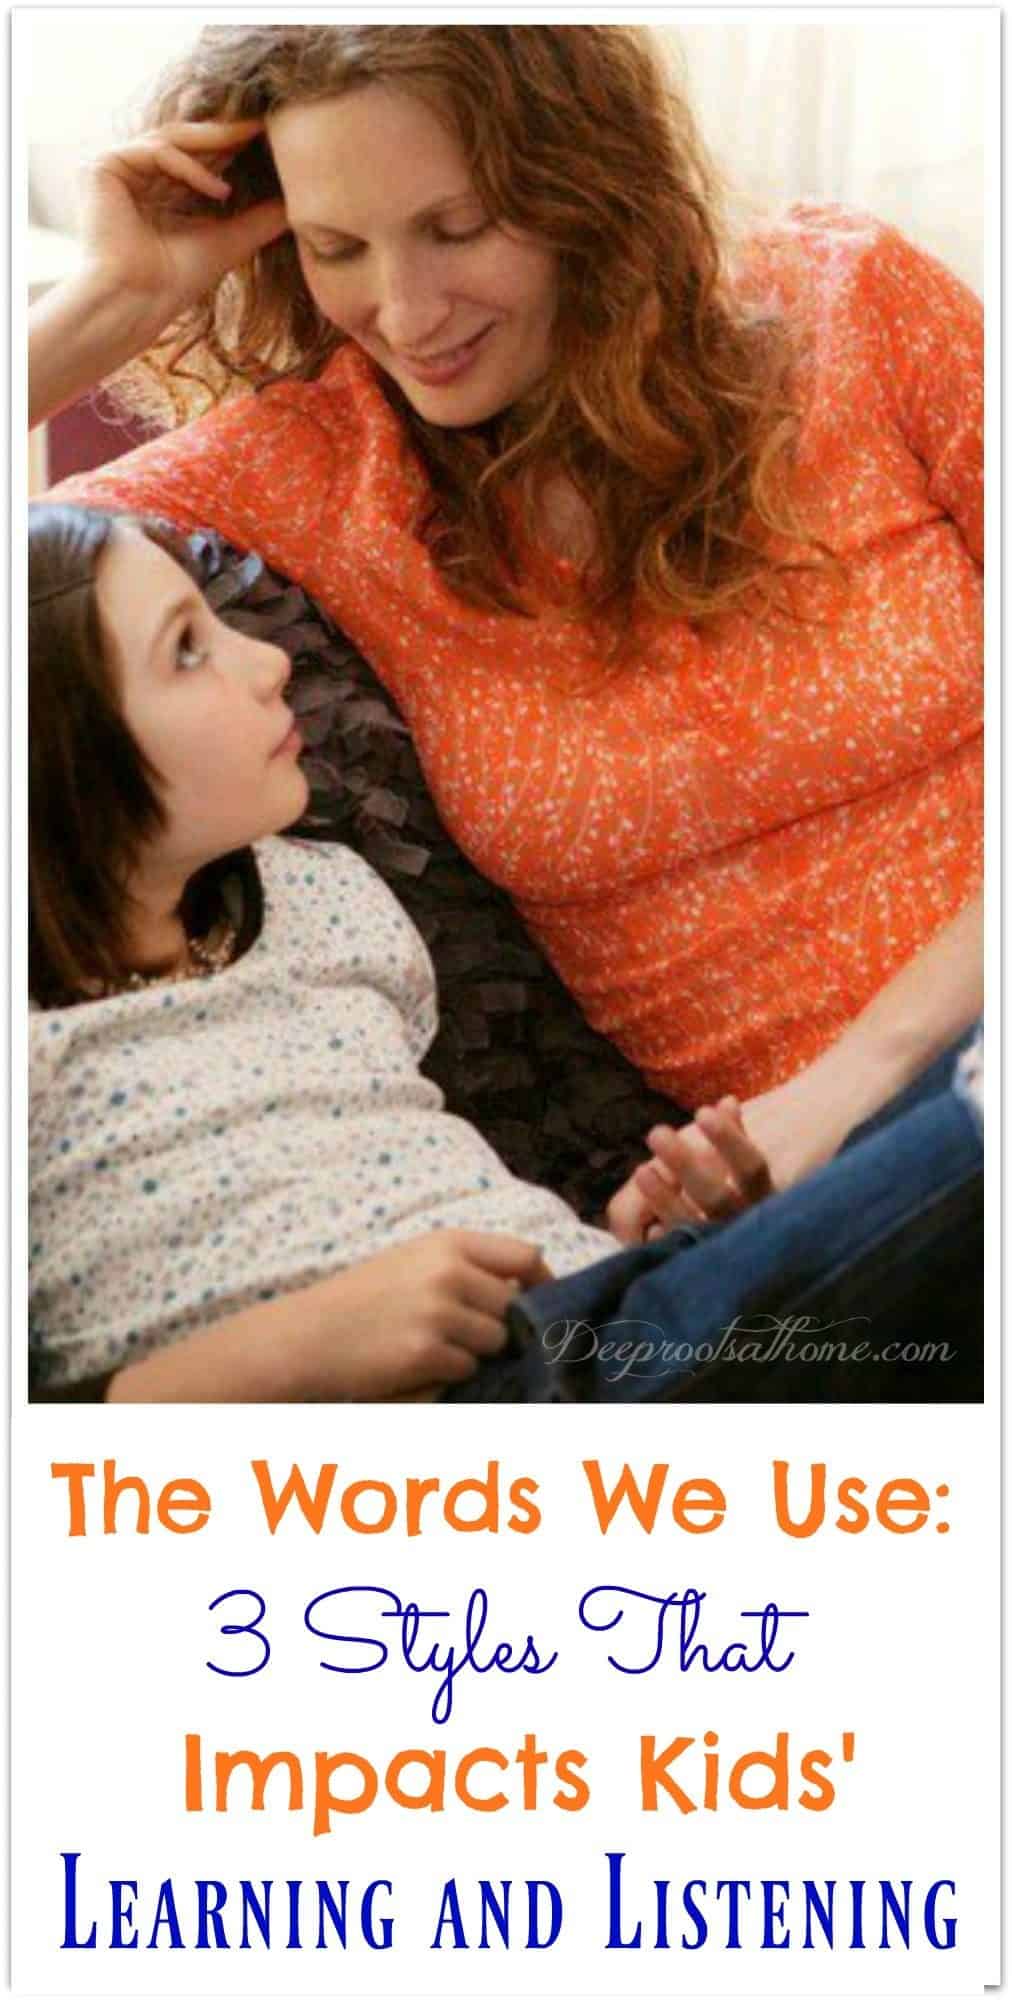 The Words We Use: 3 Styles that Impacts Kids' Learning and Listening. A calm conversation between mother and daughter